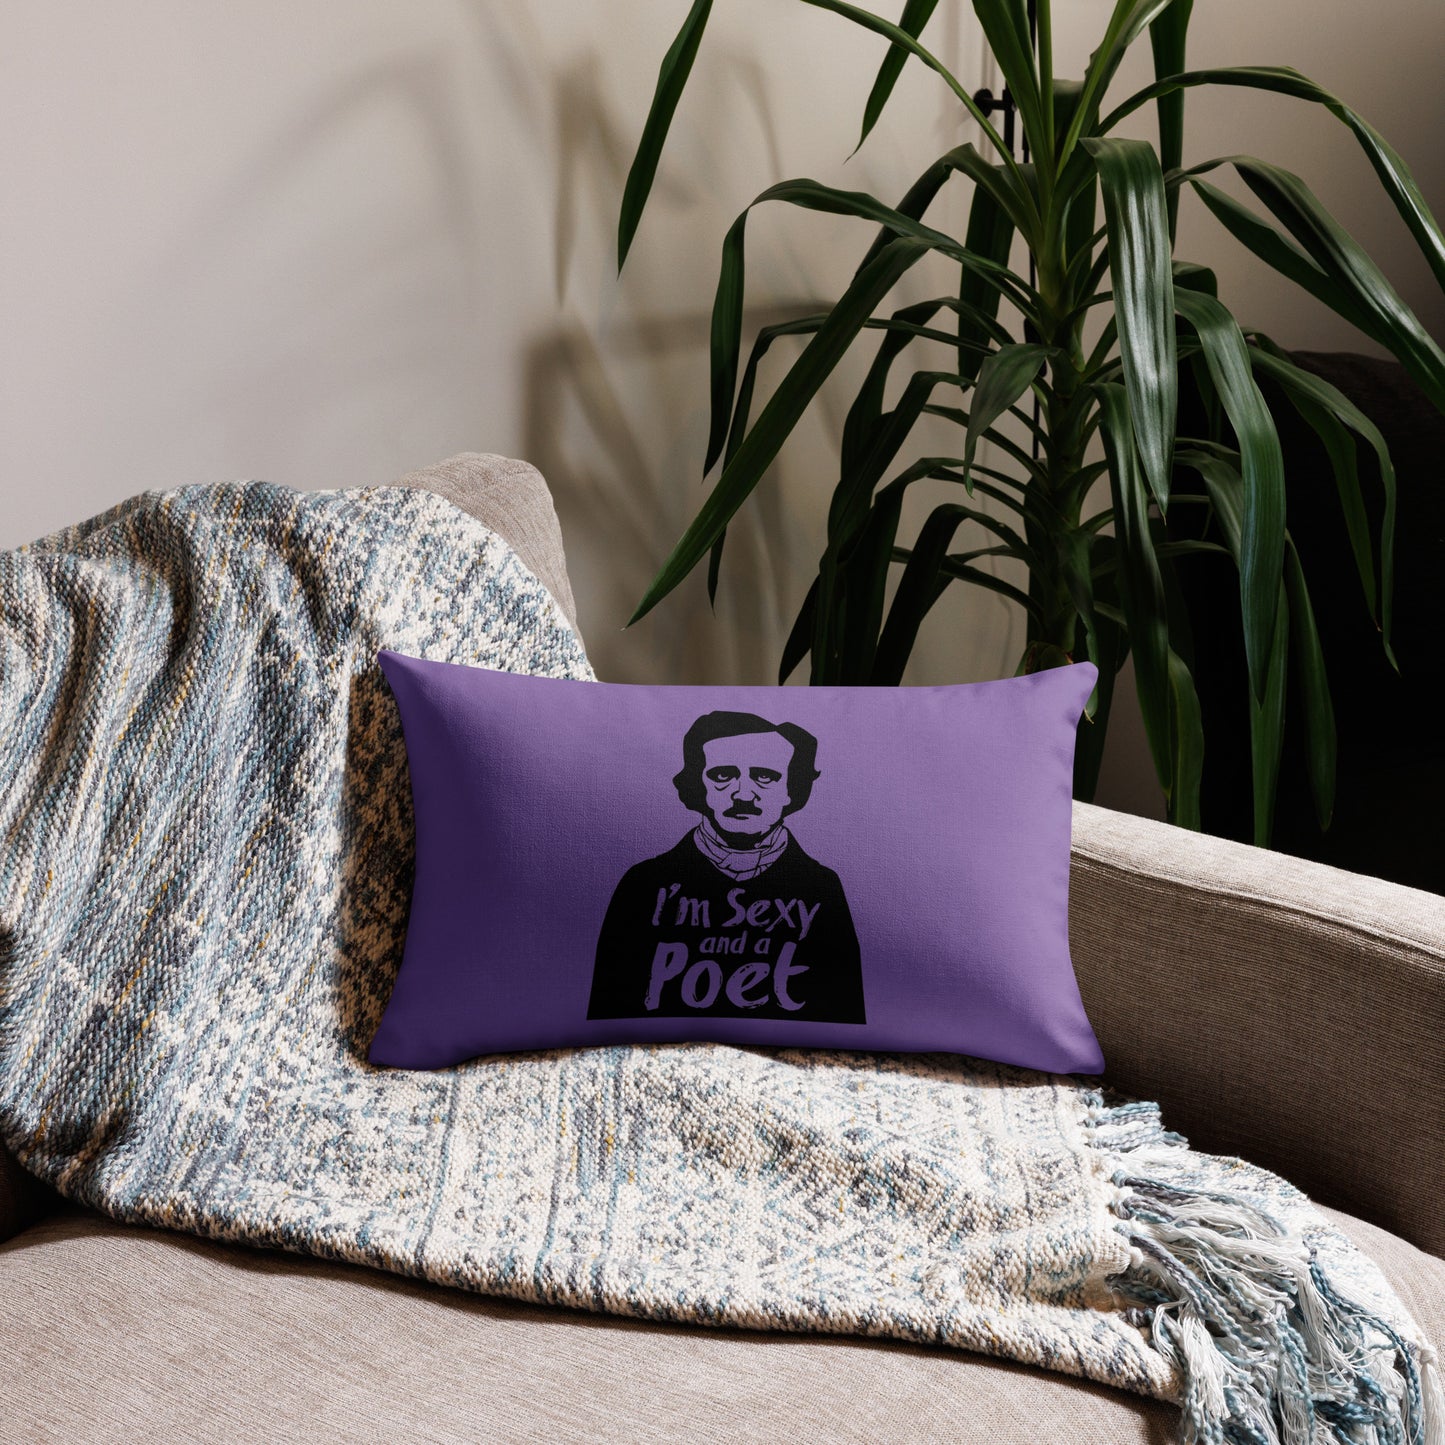 Products Edgar Allan Poe "I'm Sexy and a Poet" Premium Pillow - Purple 20 x 12